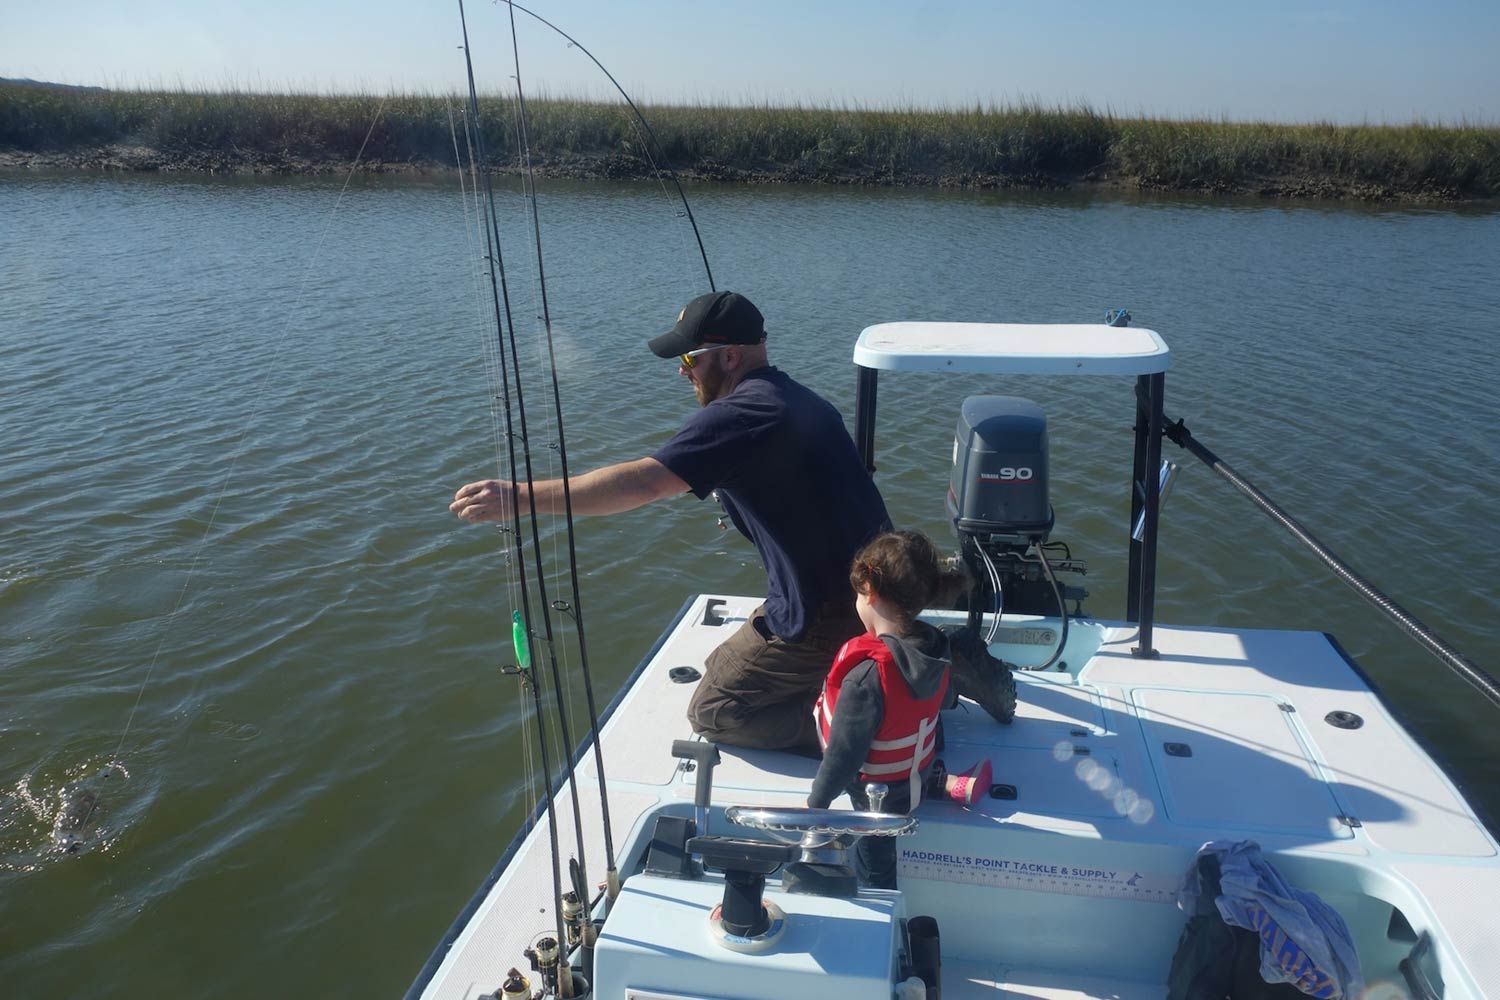 Fishing Charters | Charleston, SC | Family, Youth, or Solo Fishing Charter